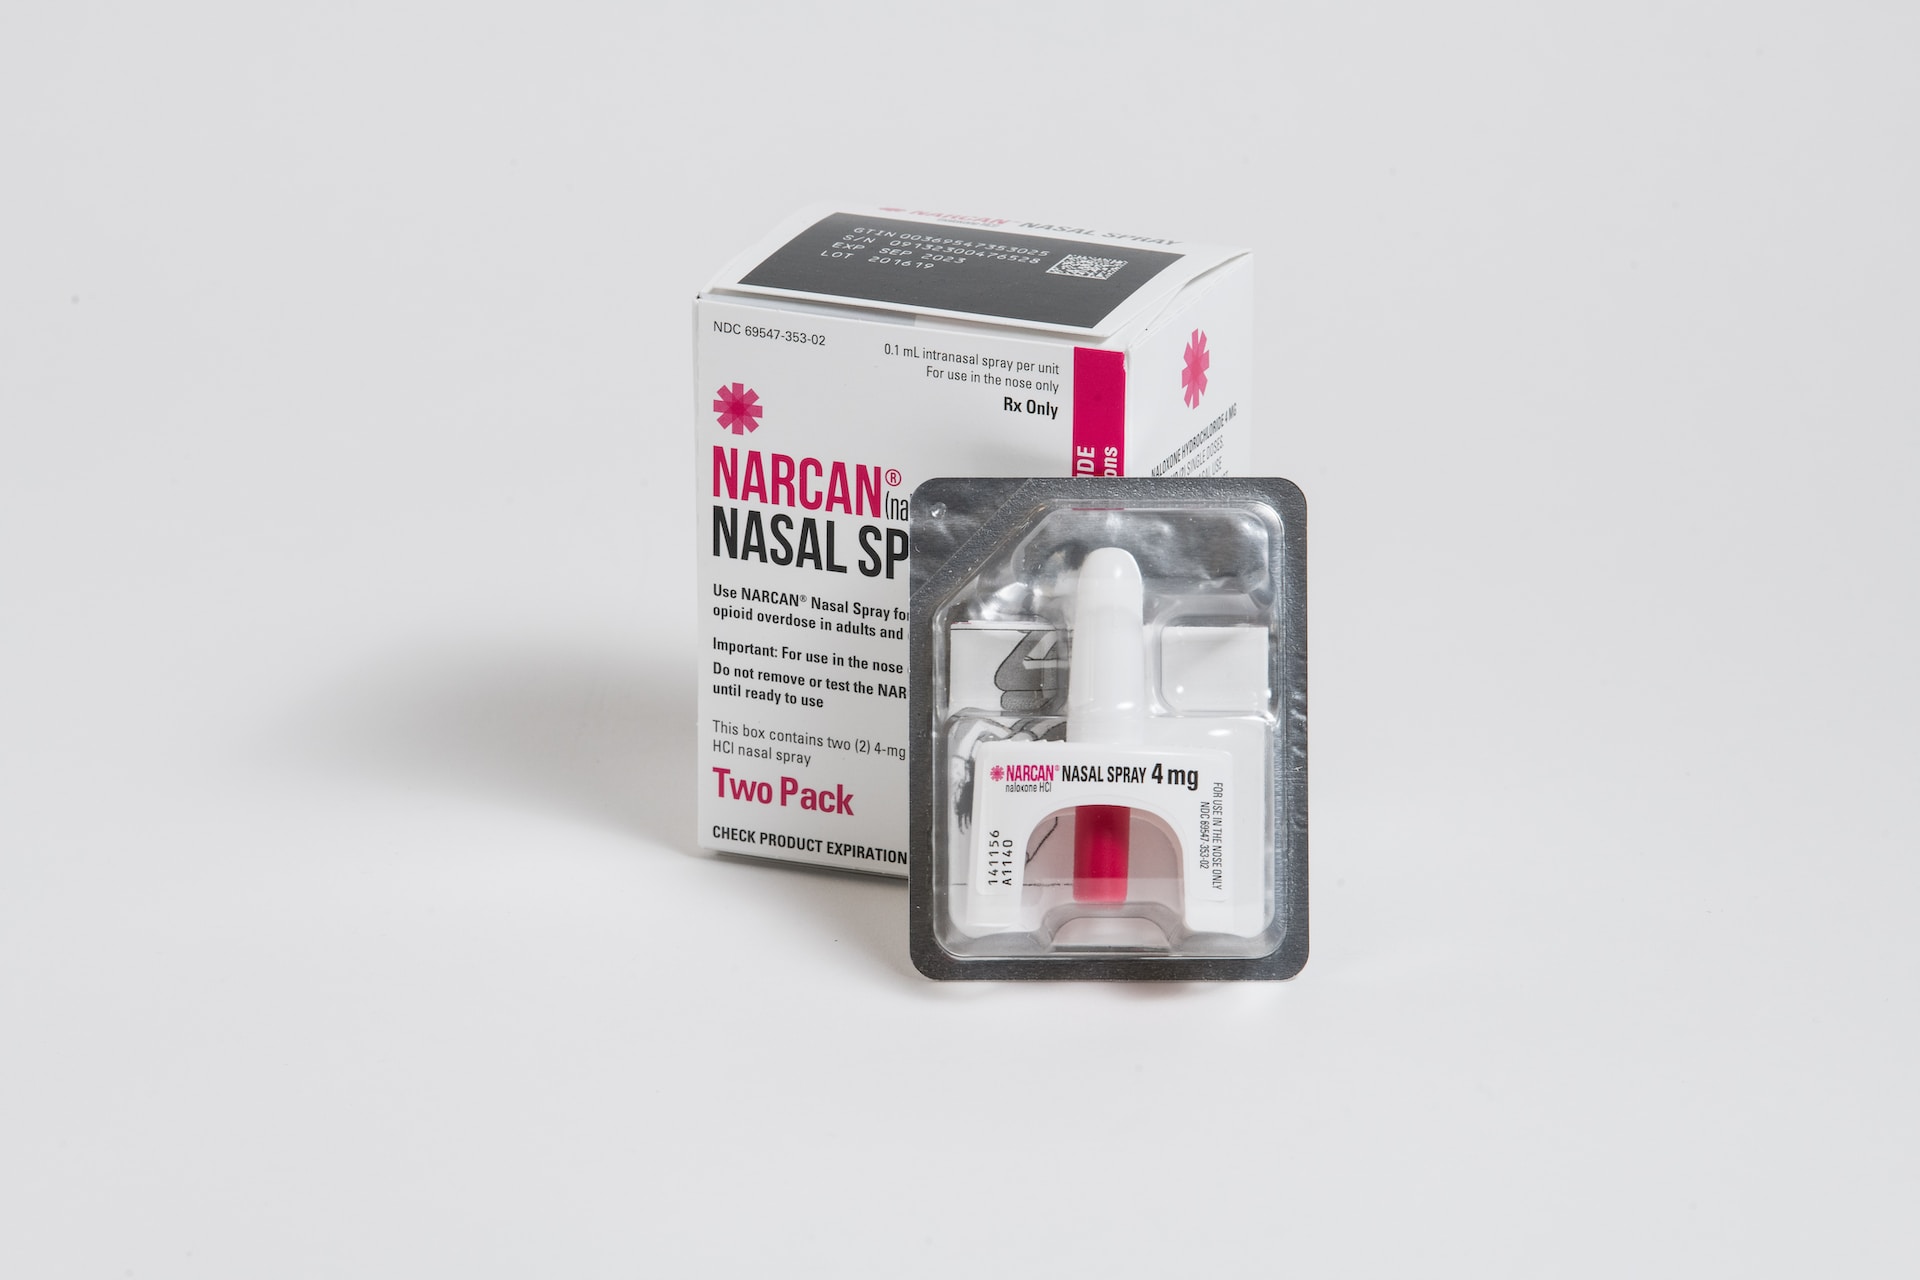 A two-pack box of Narcan nasal spray, with its white and red nasal spray inside a packet